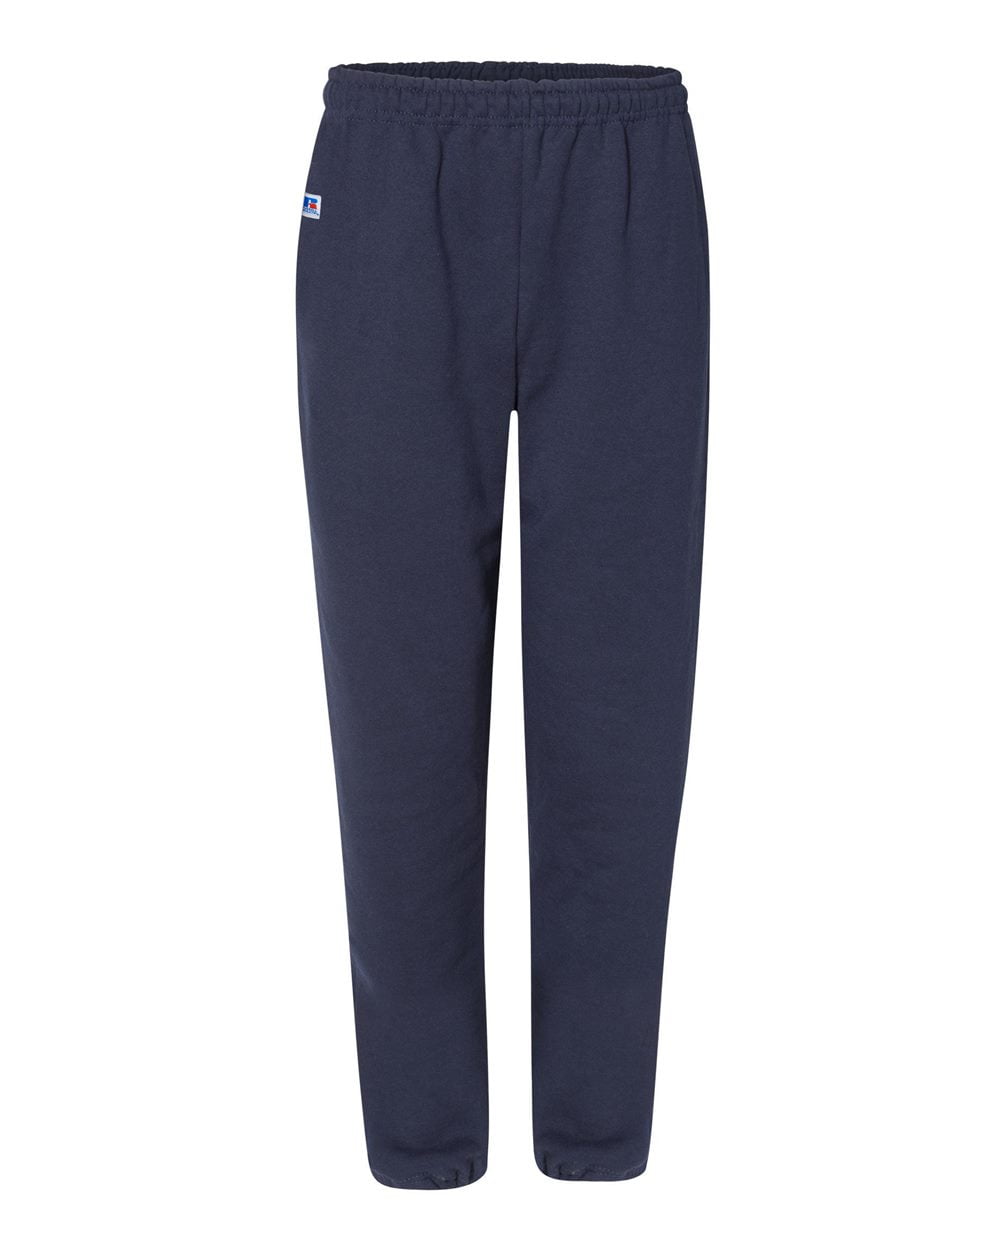 Russell Athletic Dri Power® Closed Bottom Sweatpants with Pockets ...